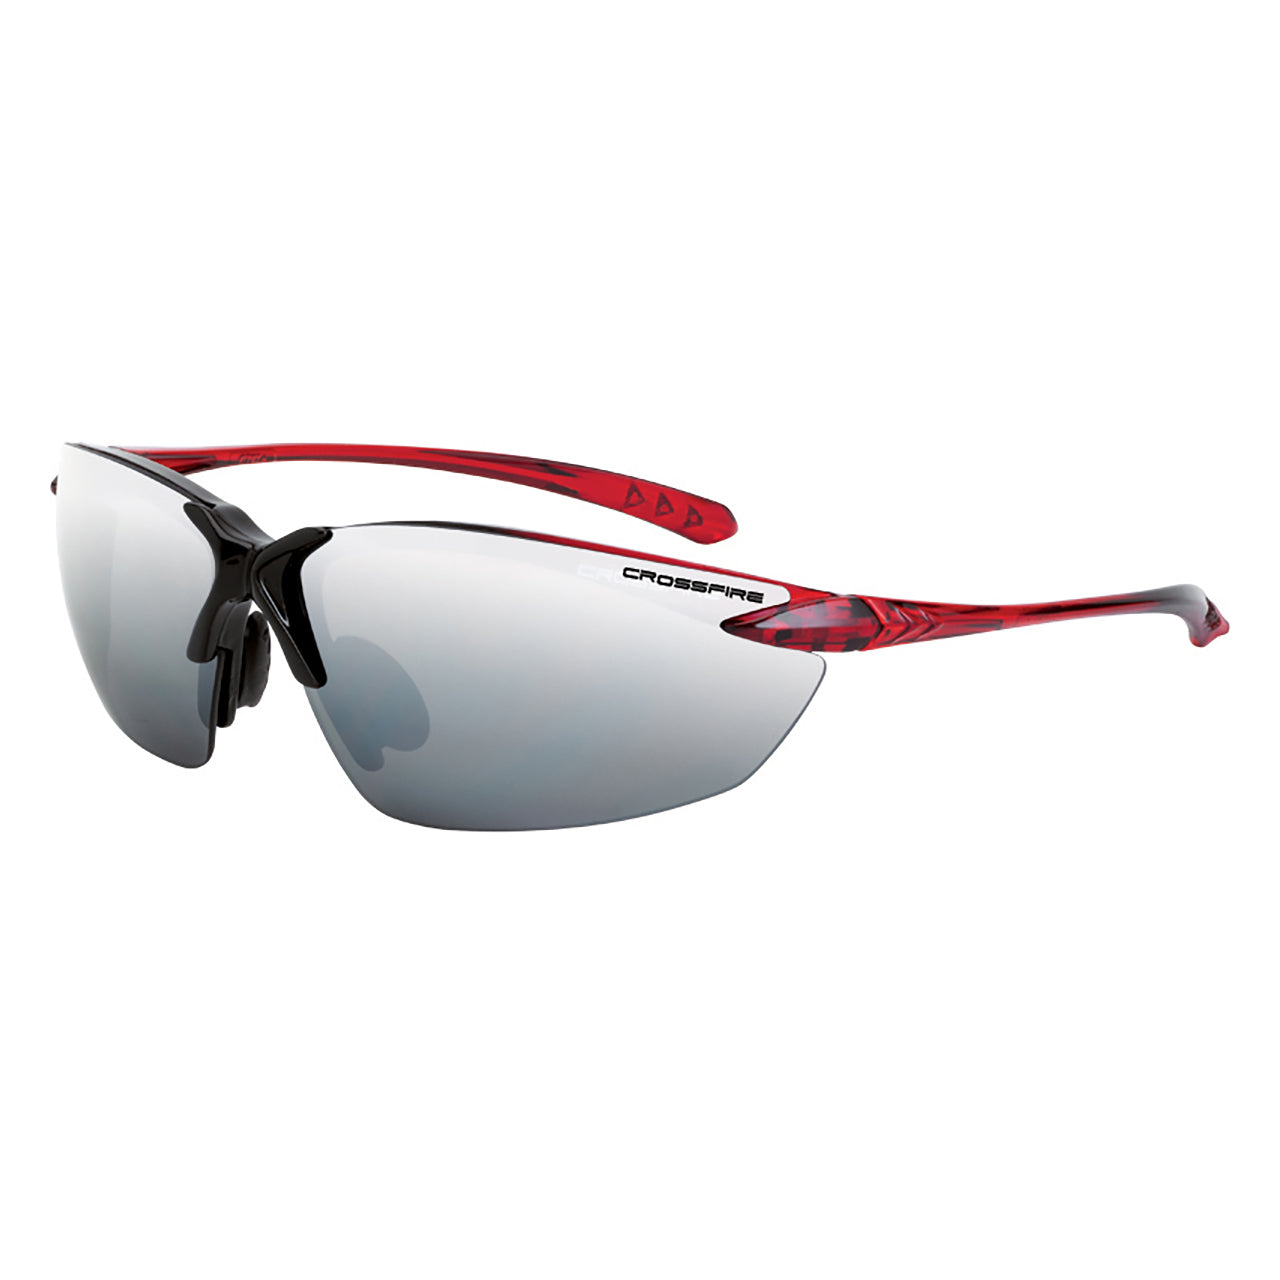 Crossfire Sniper Safety Glasses